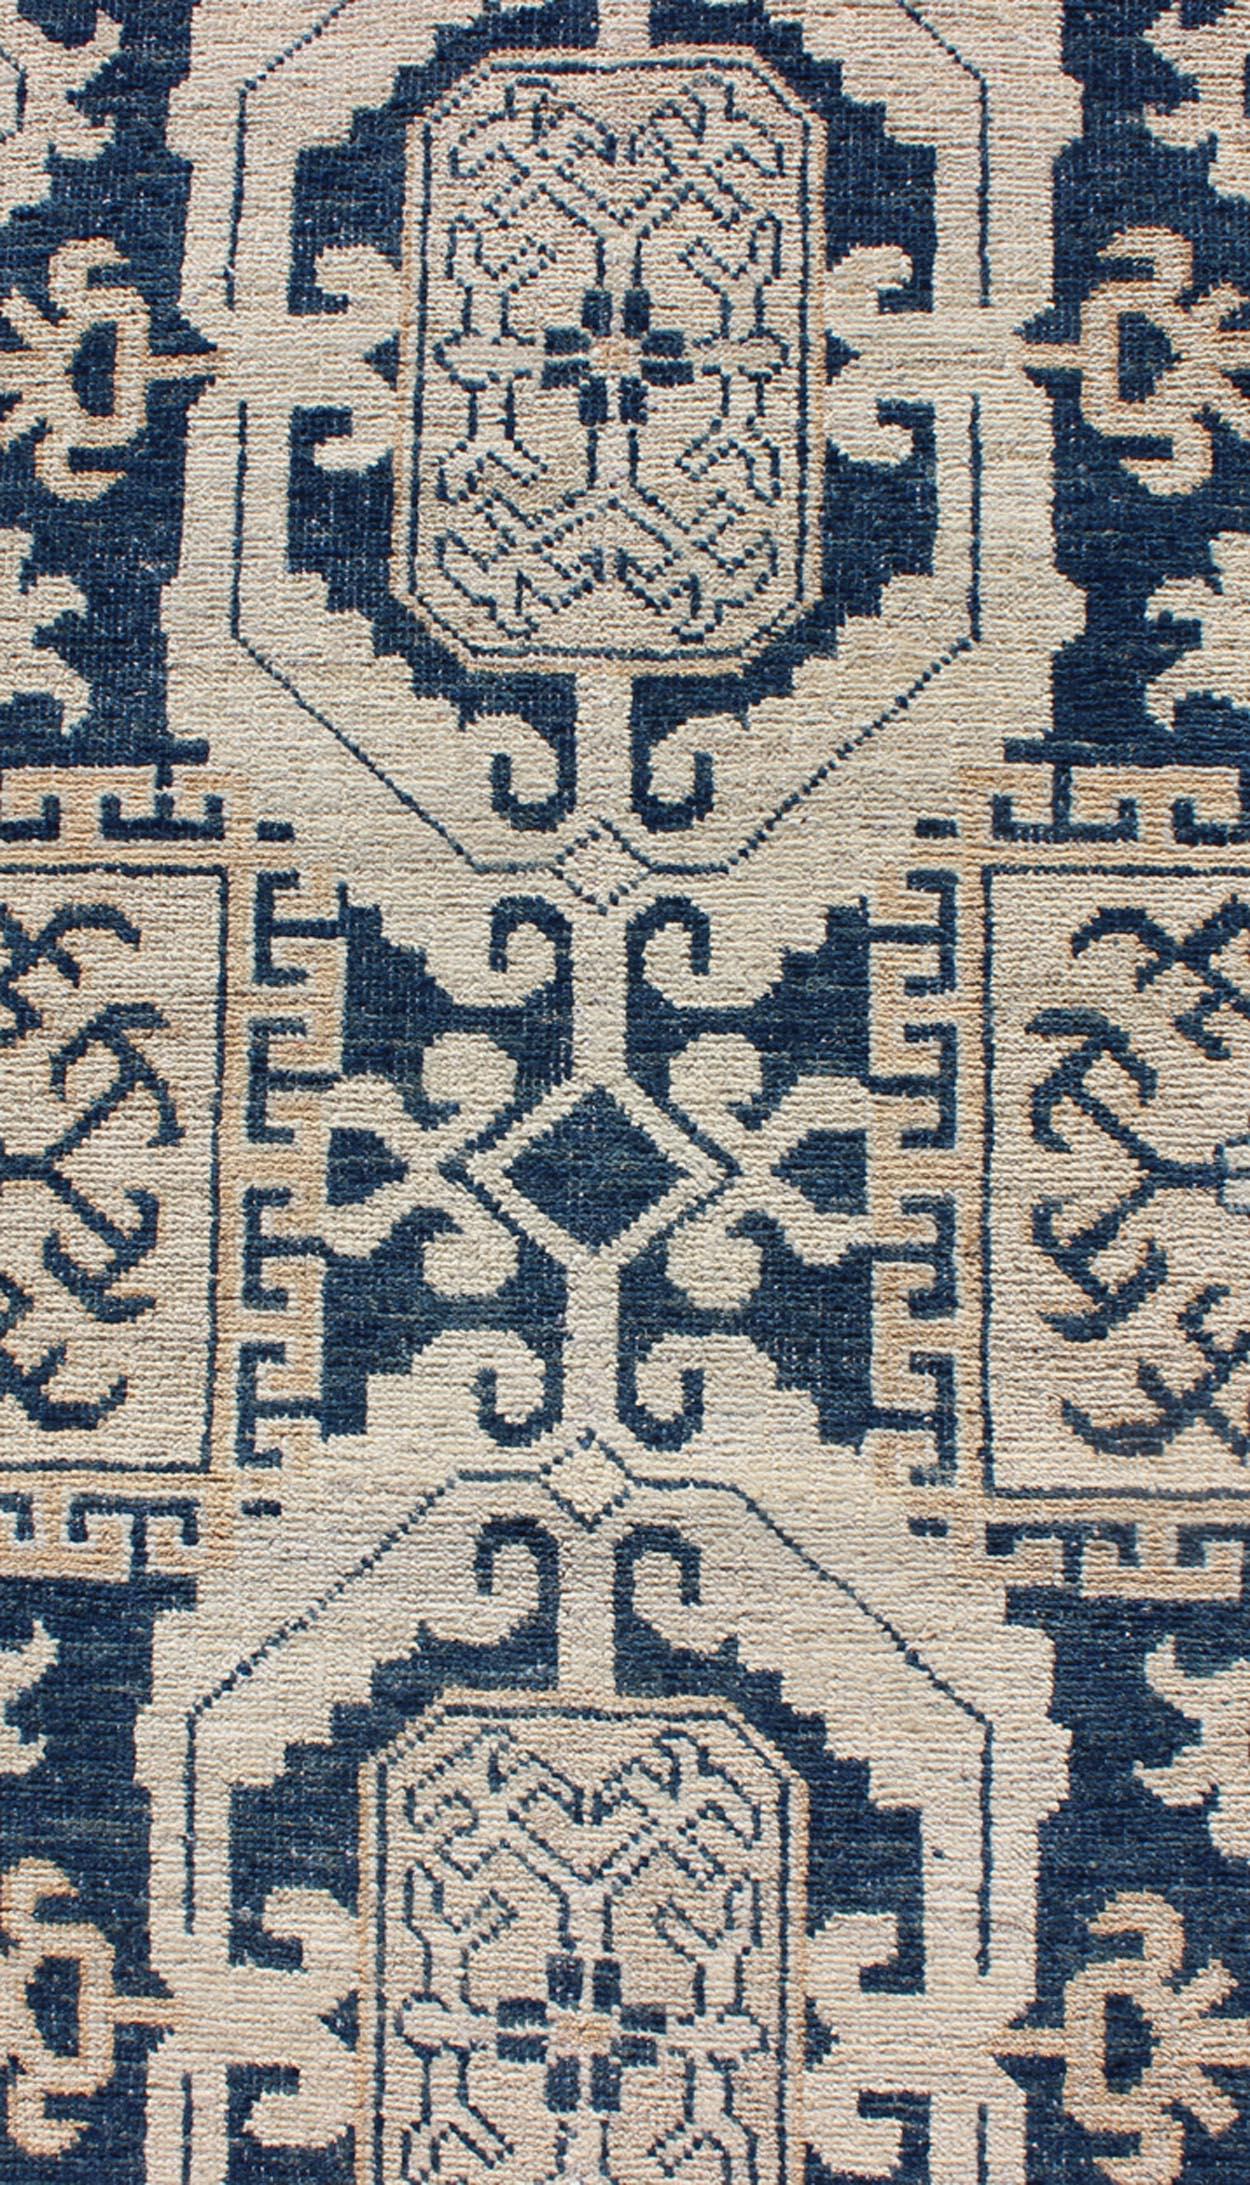 Hand Knotted Khotan Runner with Geometric Medallions in Navy and Cream Tones In Excellent Condition For Sale In Atlanta, GA